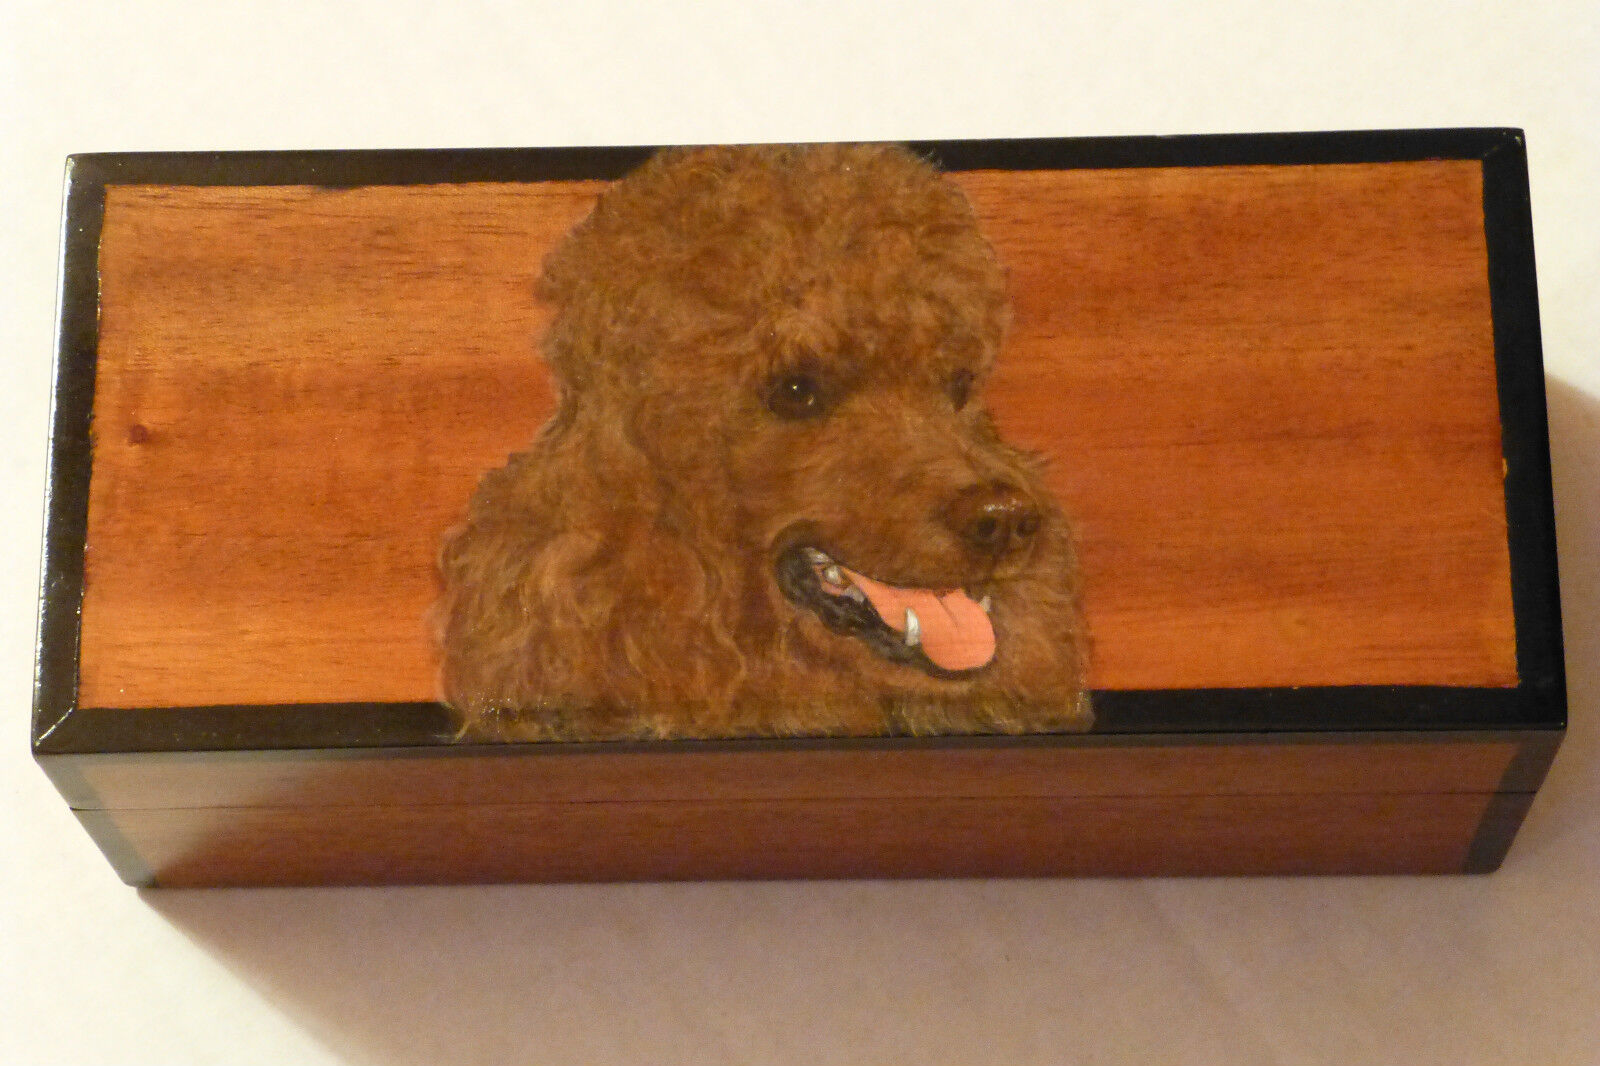 Brown Poodle Beautifully Handpainted & Detailed On Quality Teakwood Box, U.S.A.